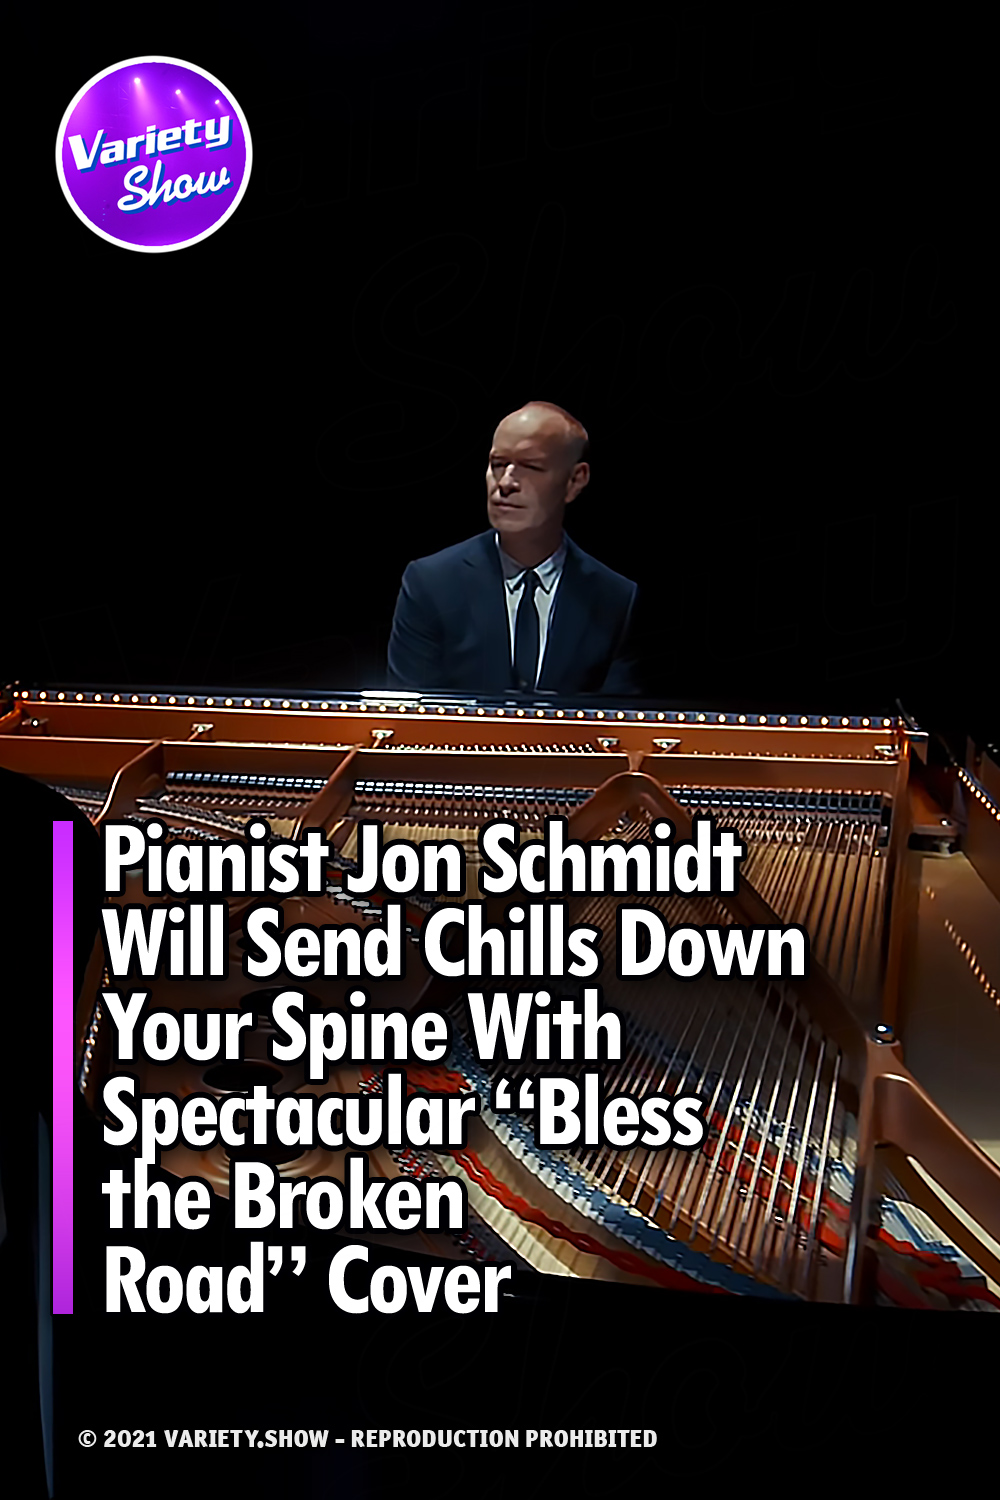 Pianist Jon Schmidt Will Send Chills Down Your Spine With Spectacular “Bless the Broken Road” Cover